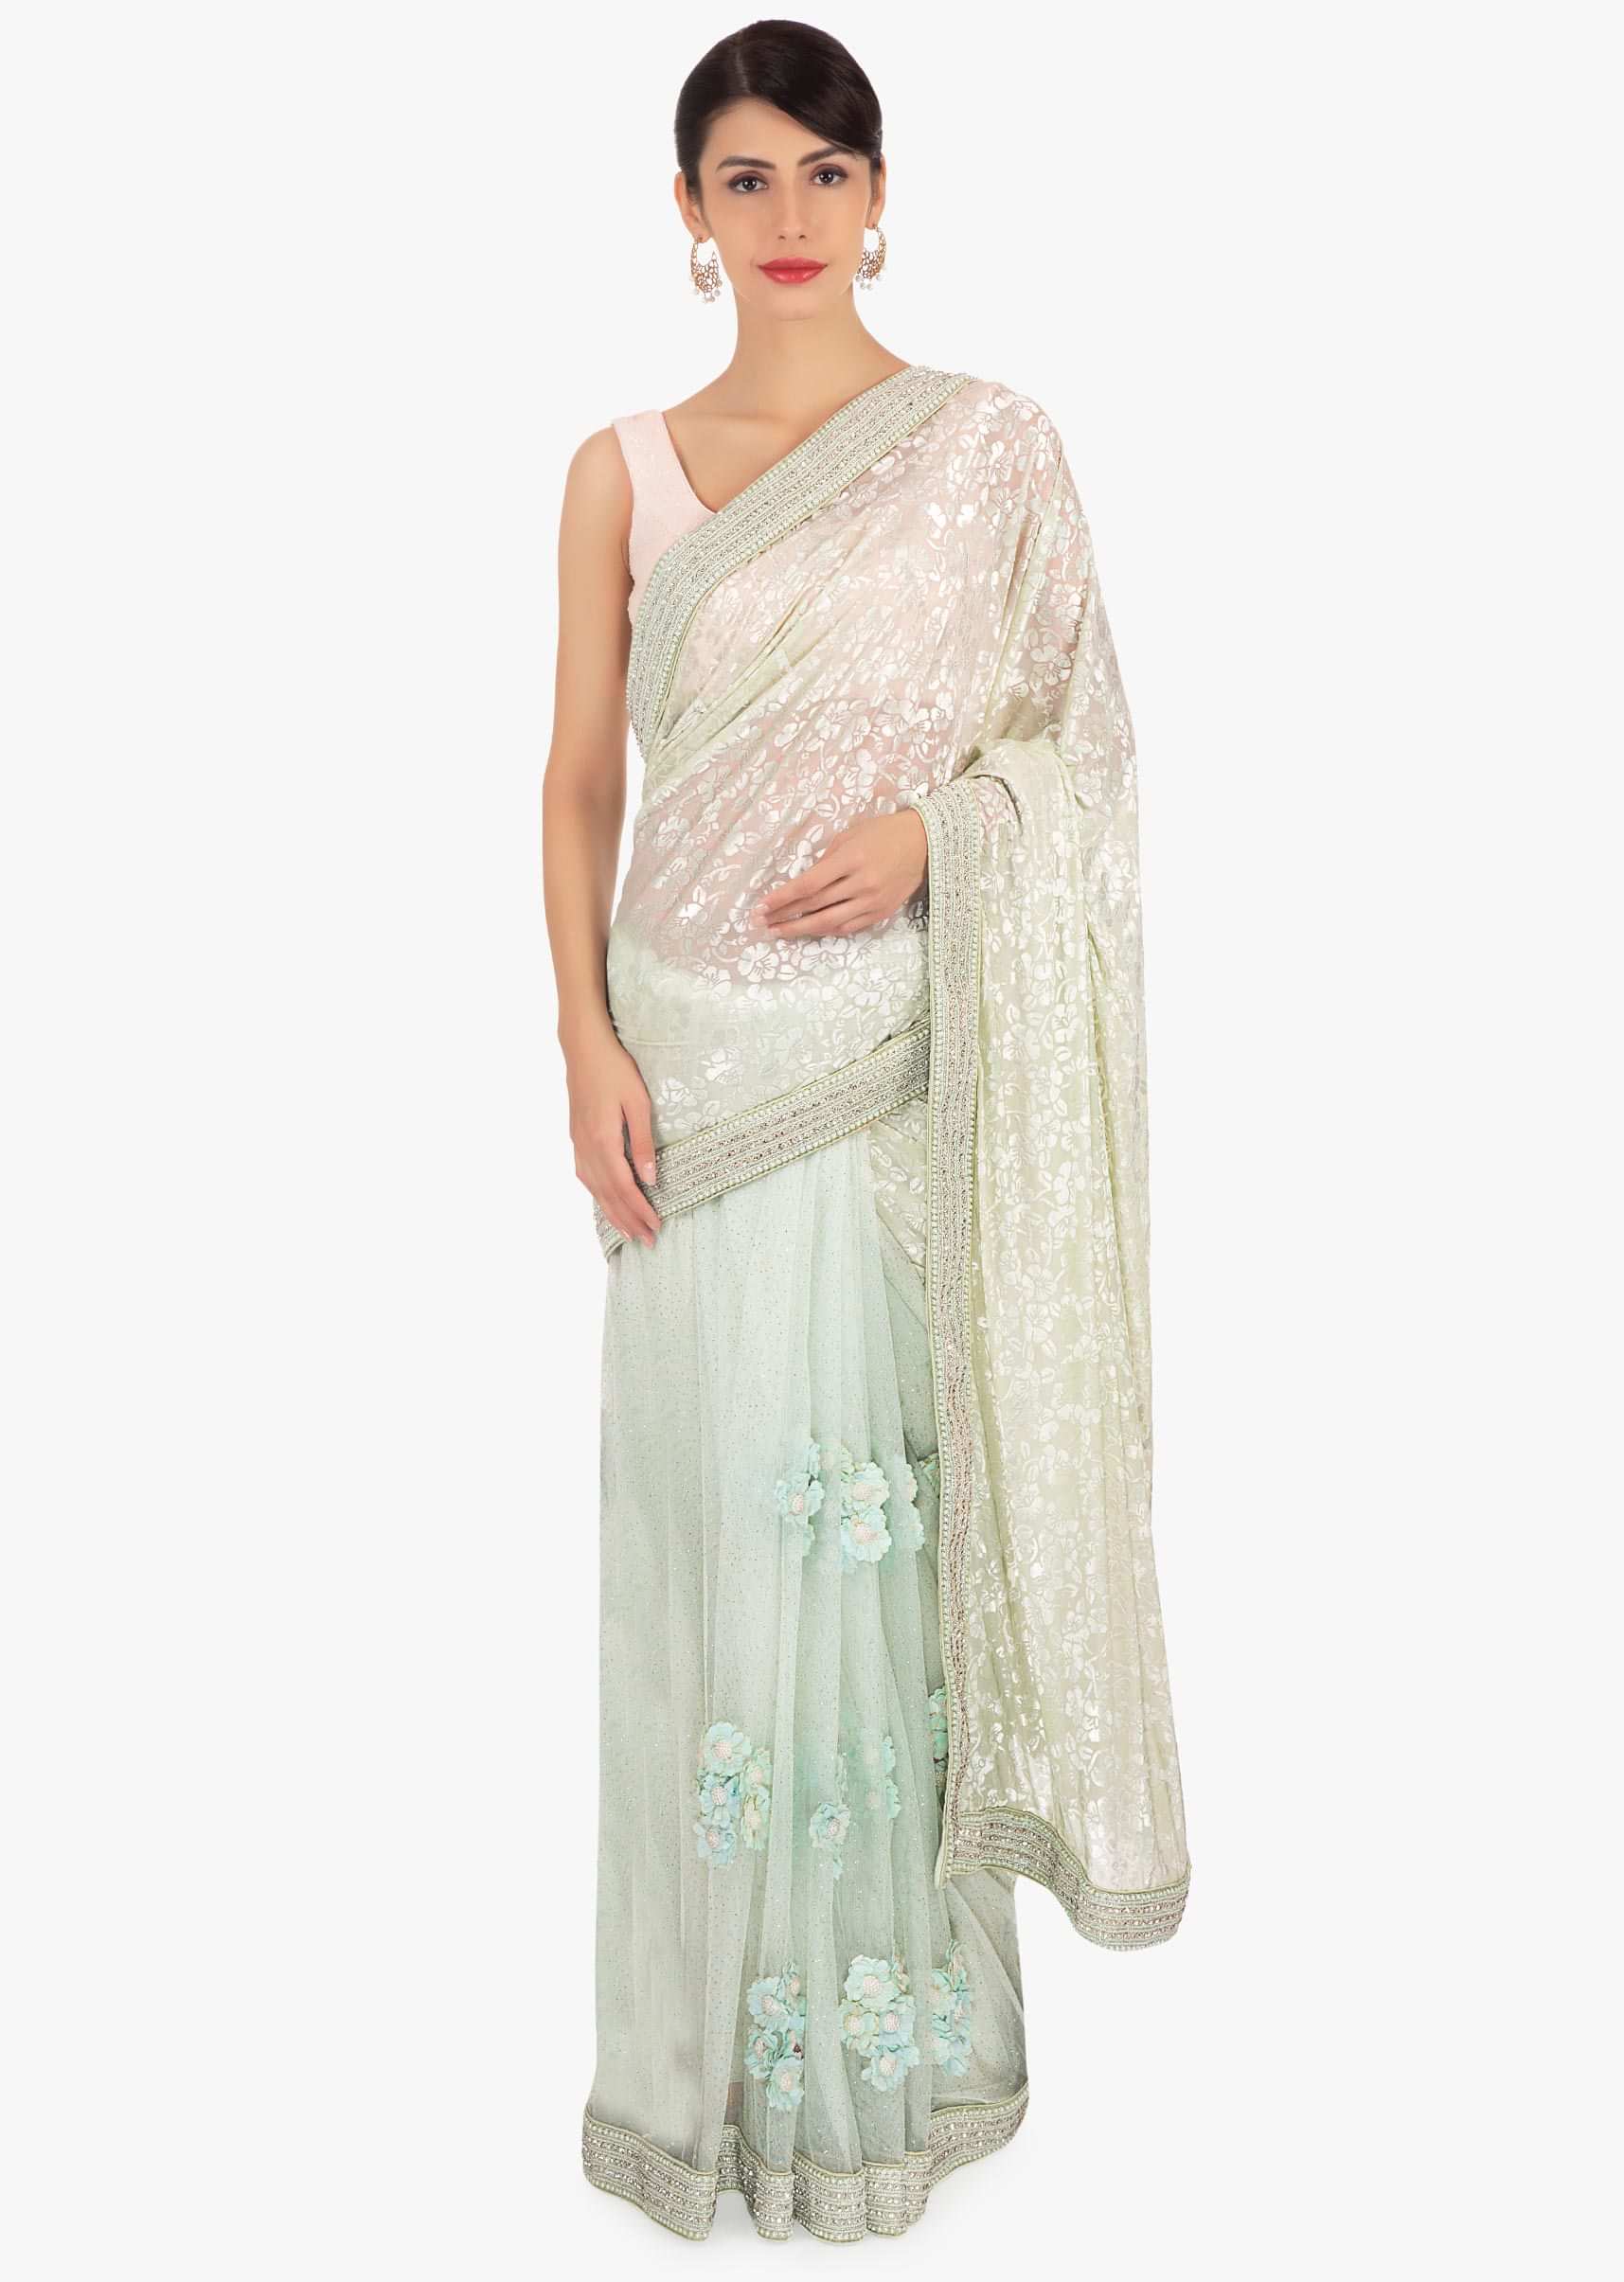 Mint green half and half saree in  net and jacquard lycra